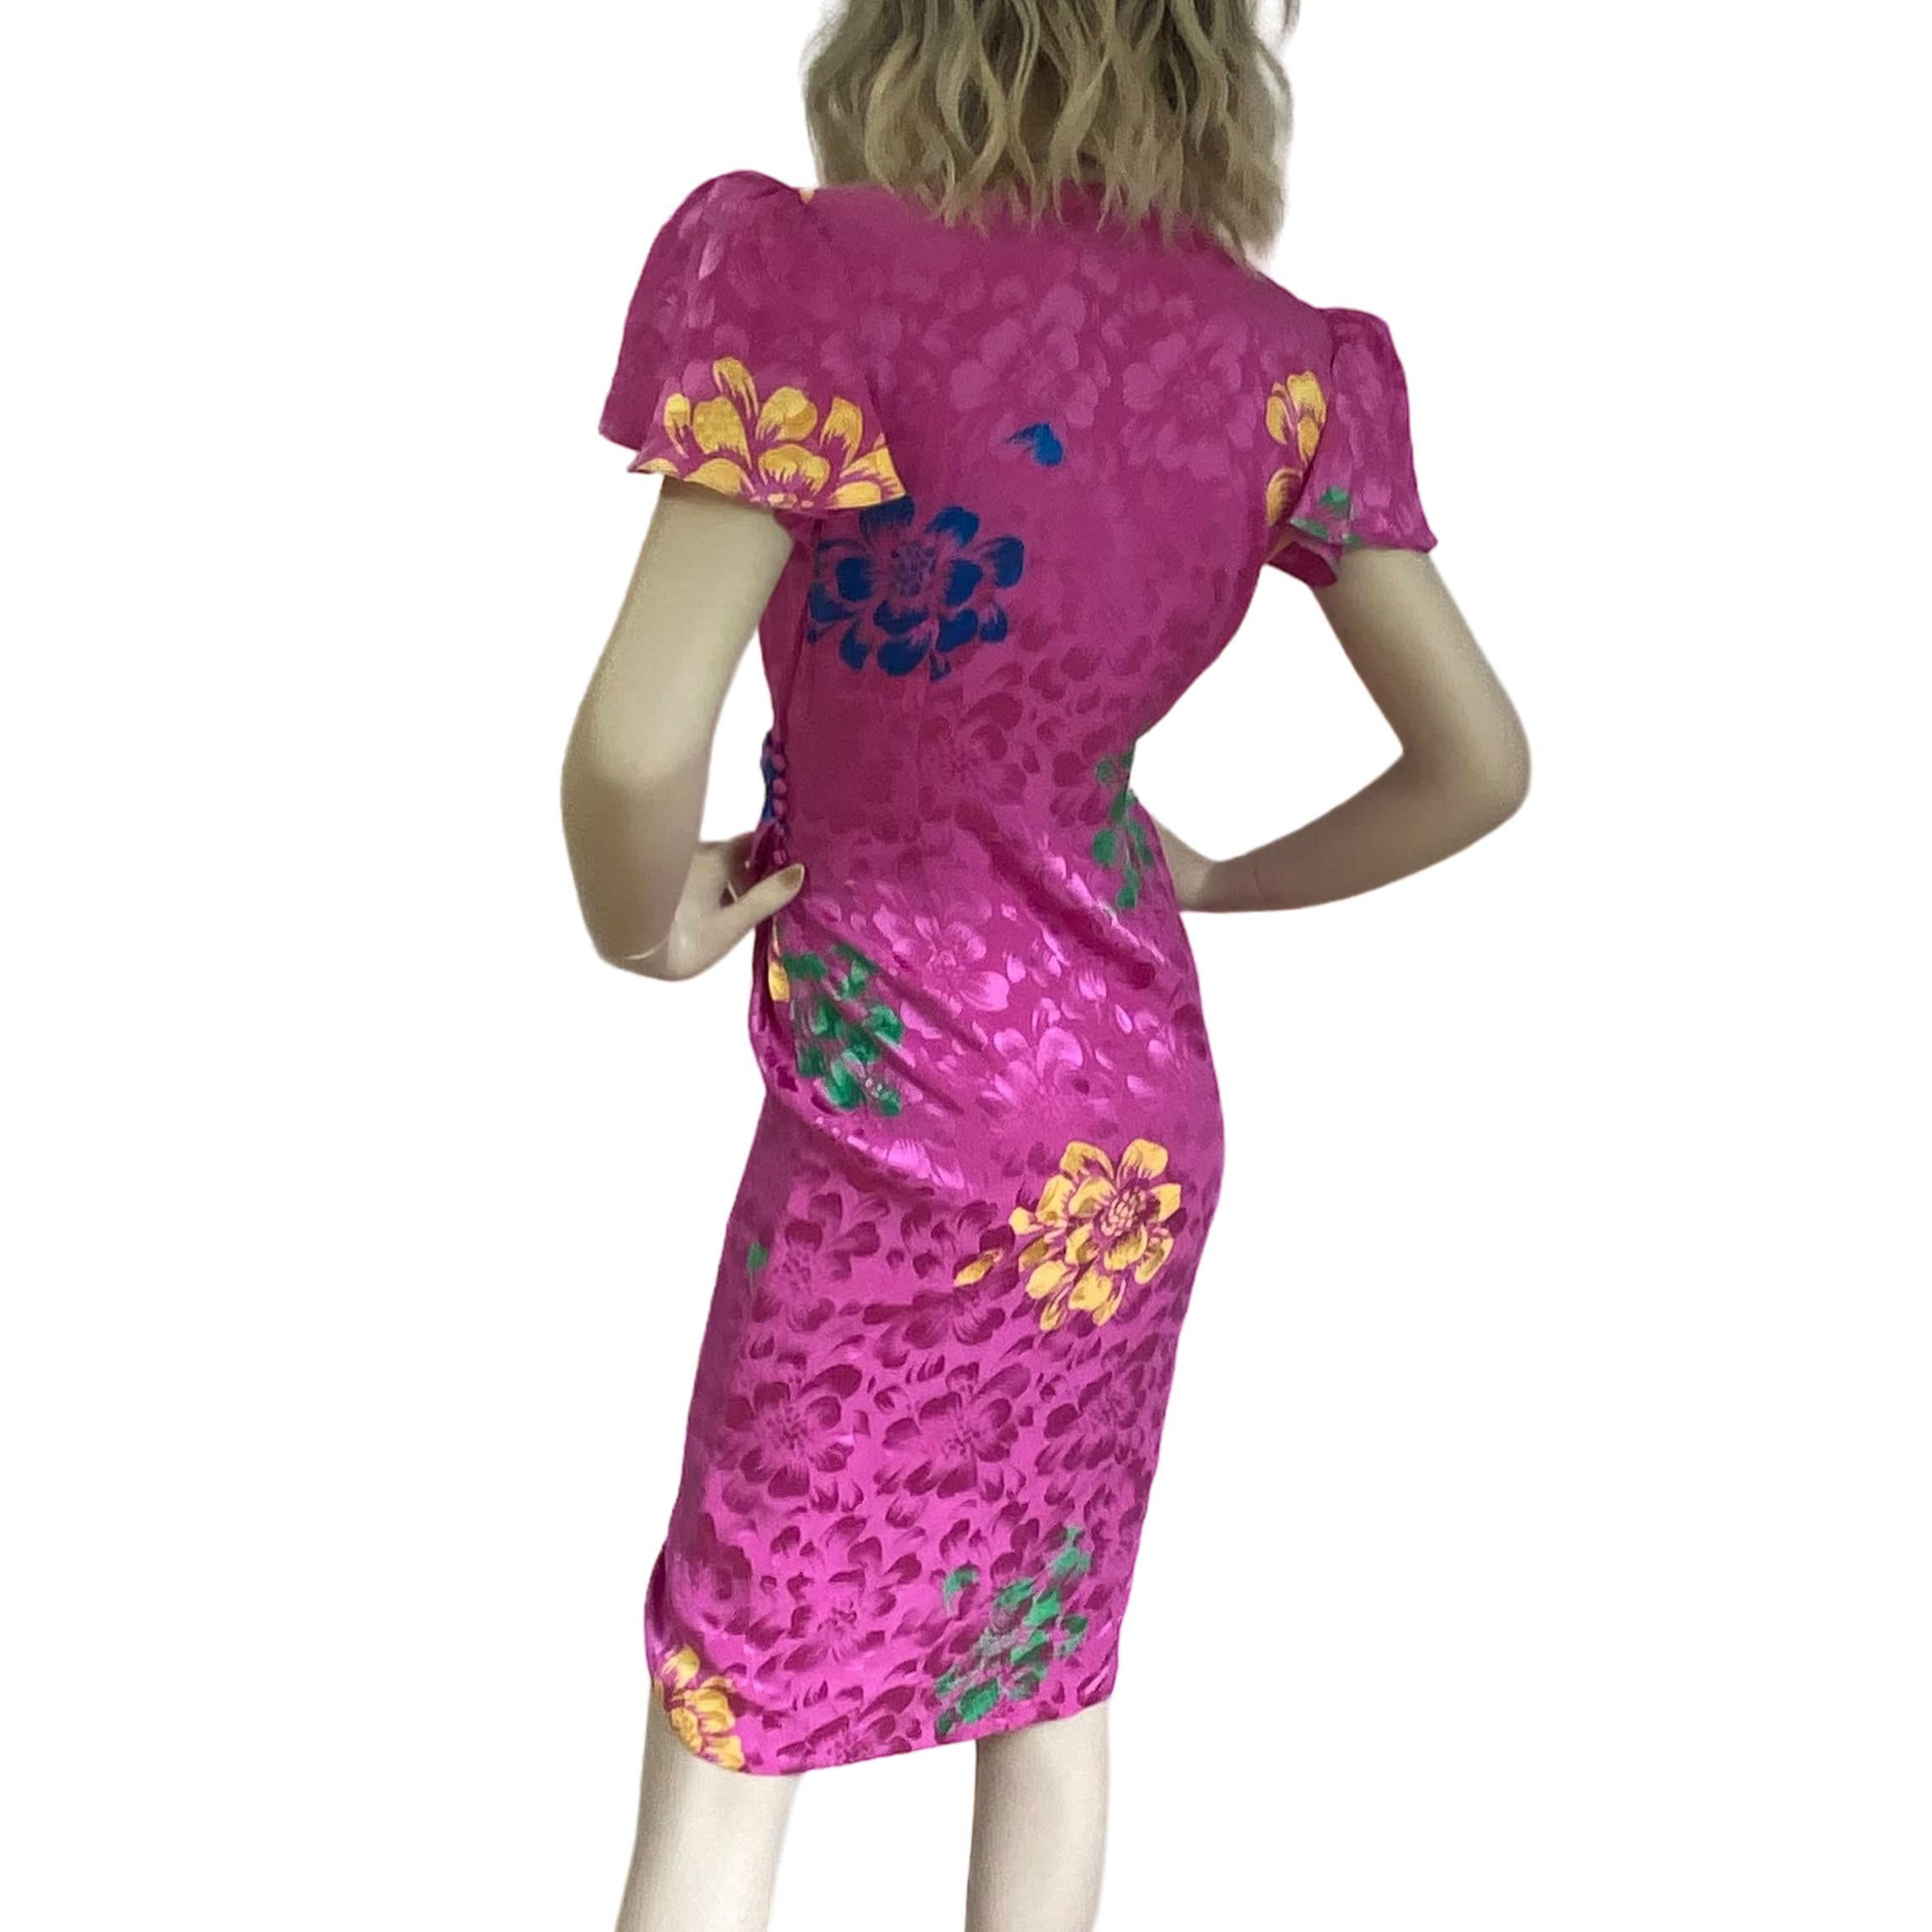 Flora Kung flutter sleeve silk jacquard wrap 'Gwyn' dress. 
Flutter sleeves and sleeve pads.
Spaghetti ties plus self-fabric covered loops and buttons.
Dress only. Accessories are listed separately.
Condition: NWT from FK design library 
Check out